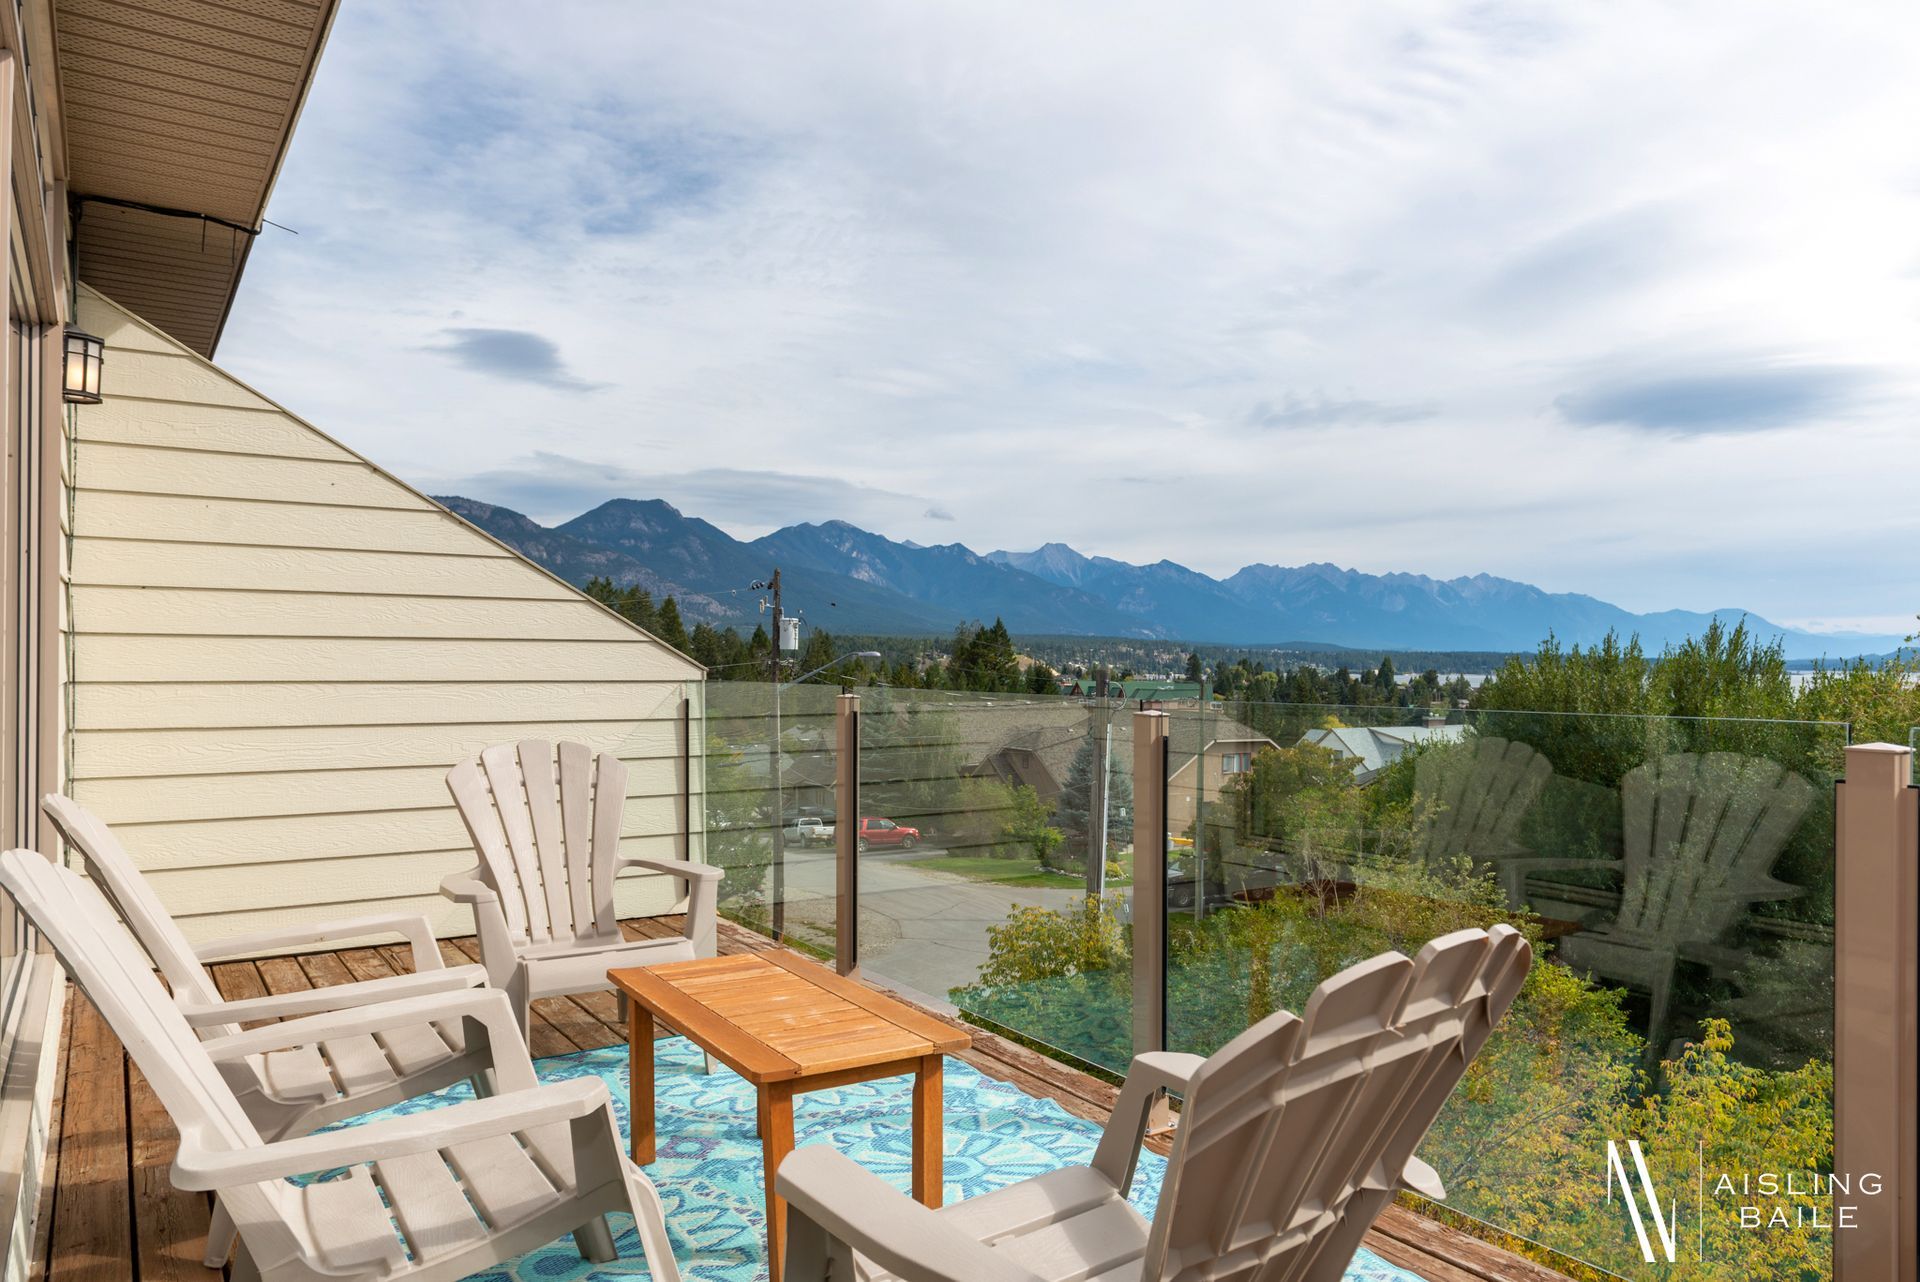 Private patio with lake and mountain views from Central Elegance, an Invermere BC Vacation Rental hosted by Aisling Baile Property Management.